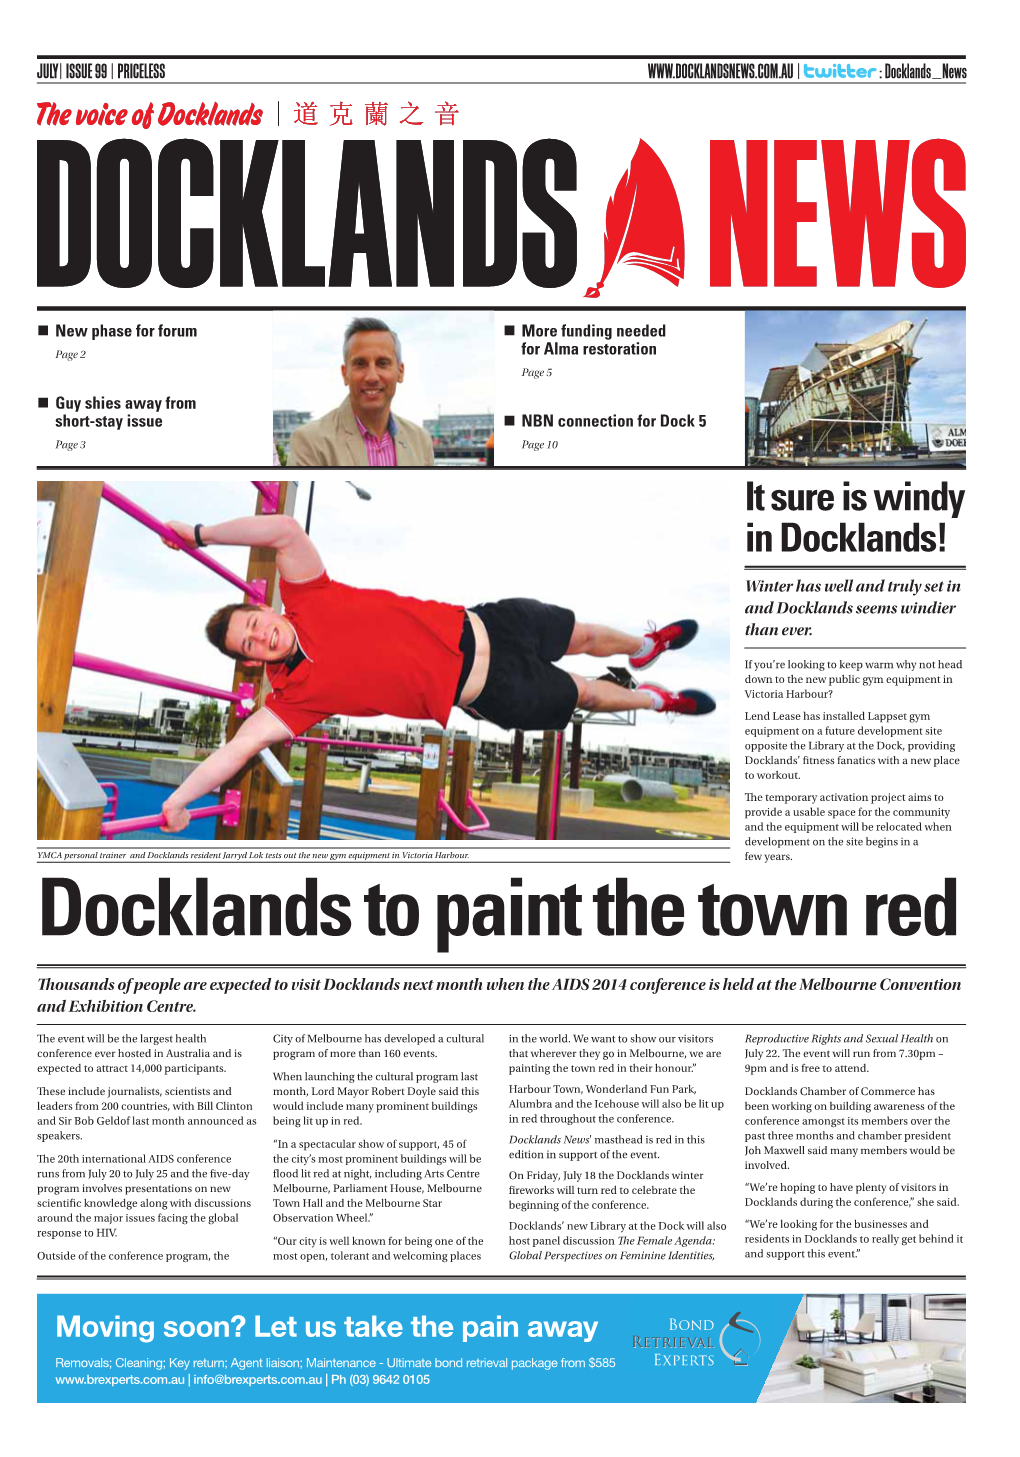 Docklands to Paint the Town Red